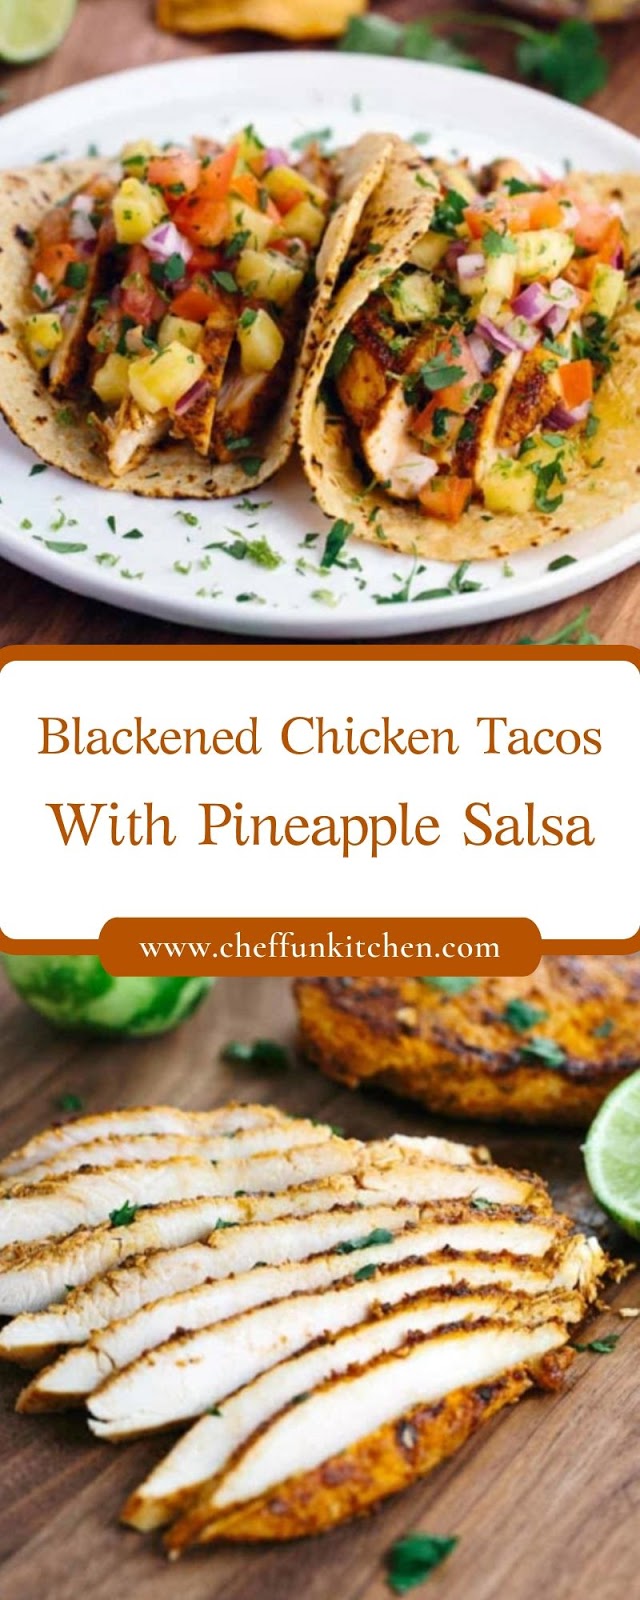 Blackened Chicken Tacos With Pineapple Salsa